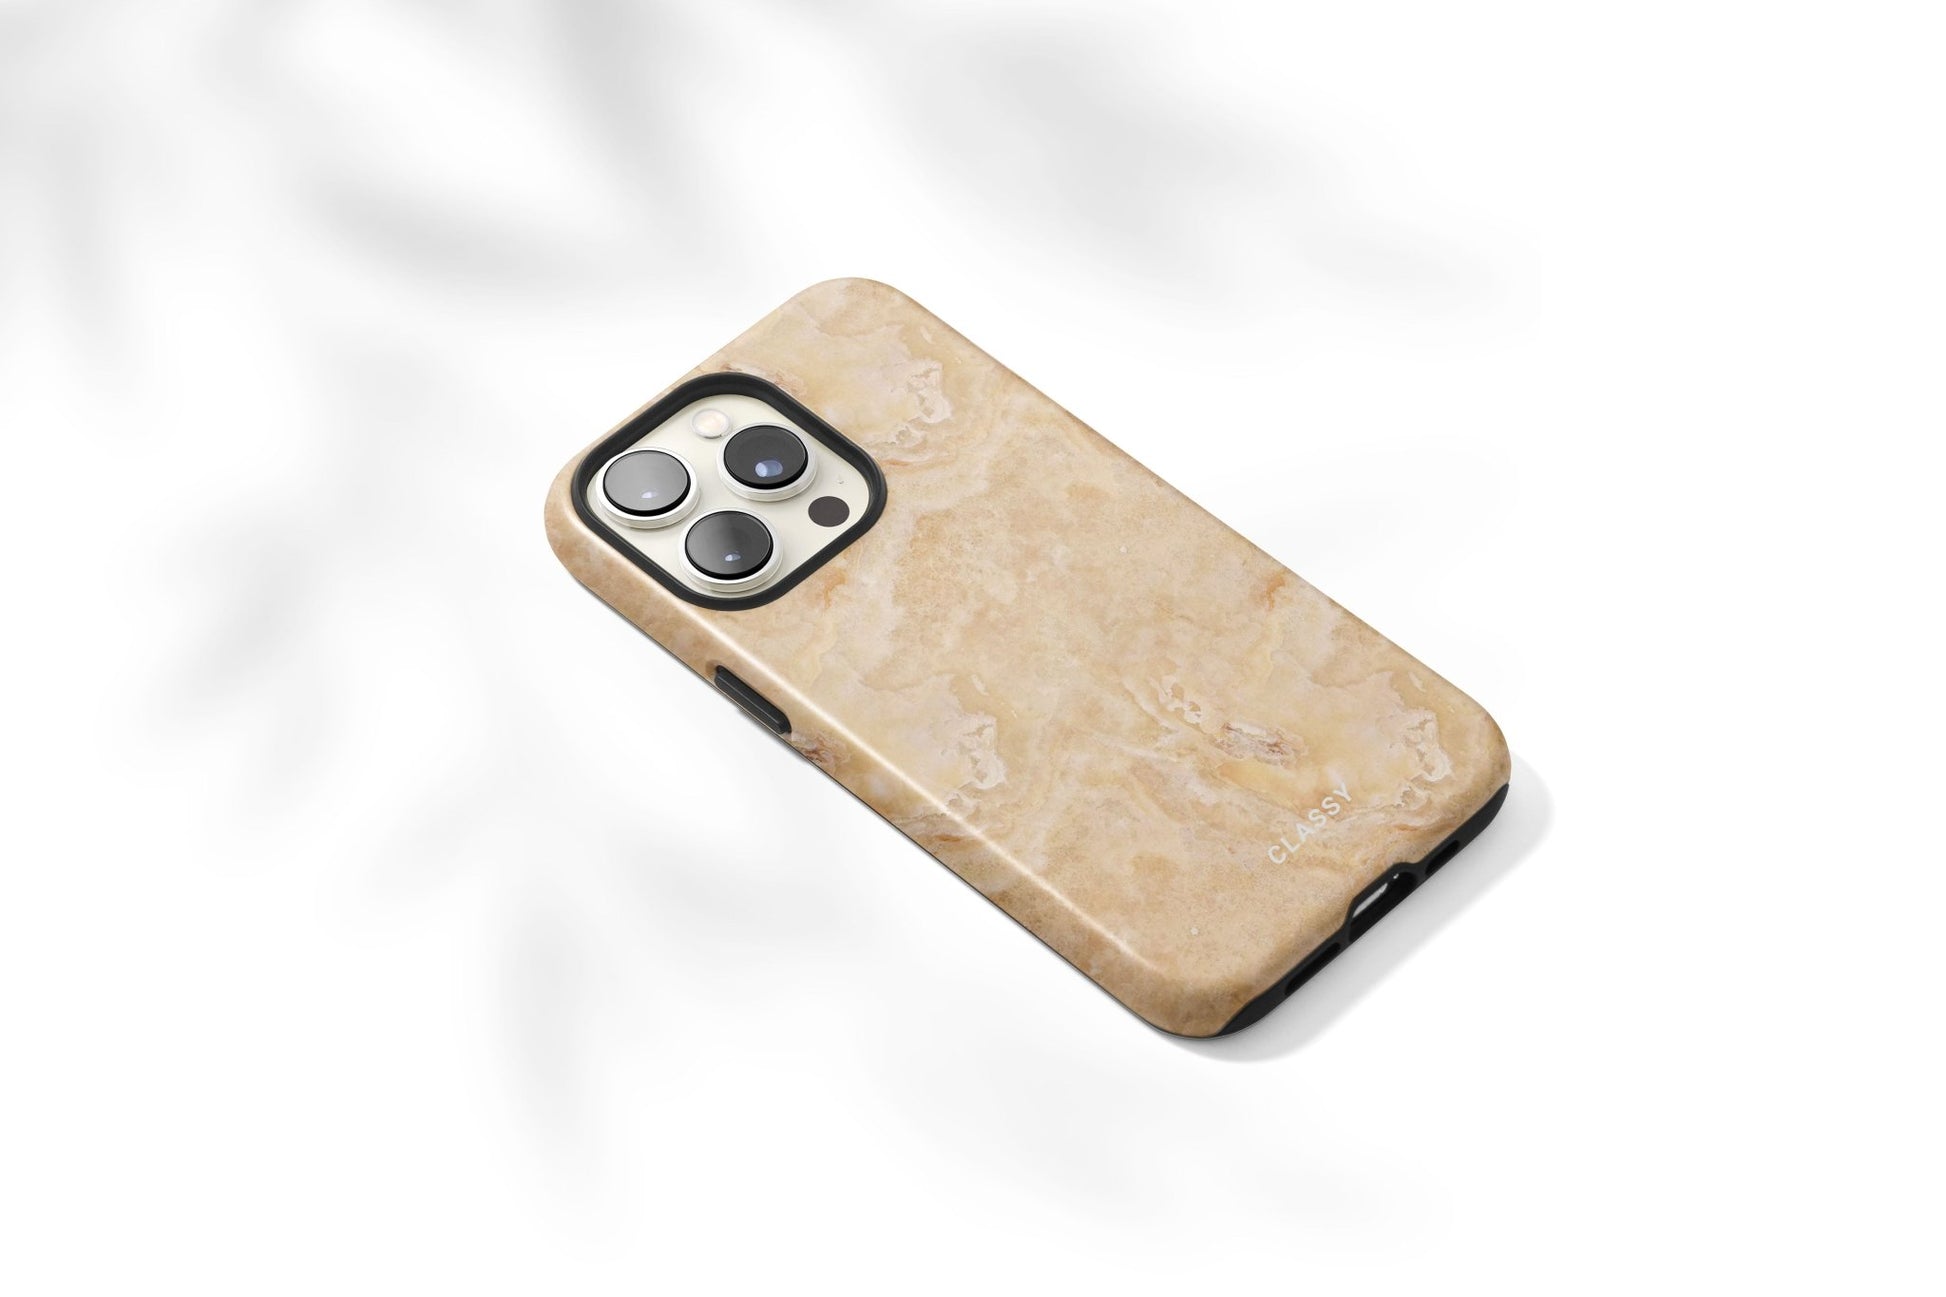 Beige Marble Tough Case - Classy Cases - Phone Case - iPhone 15 - Glossy -